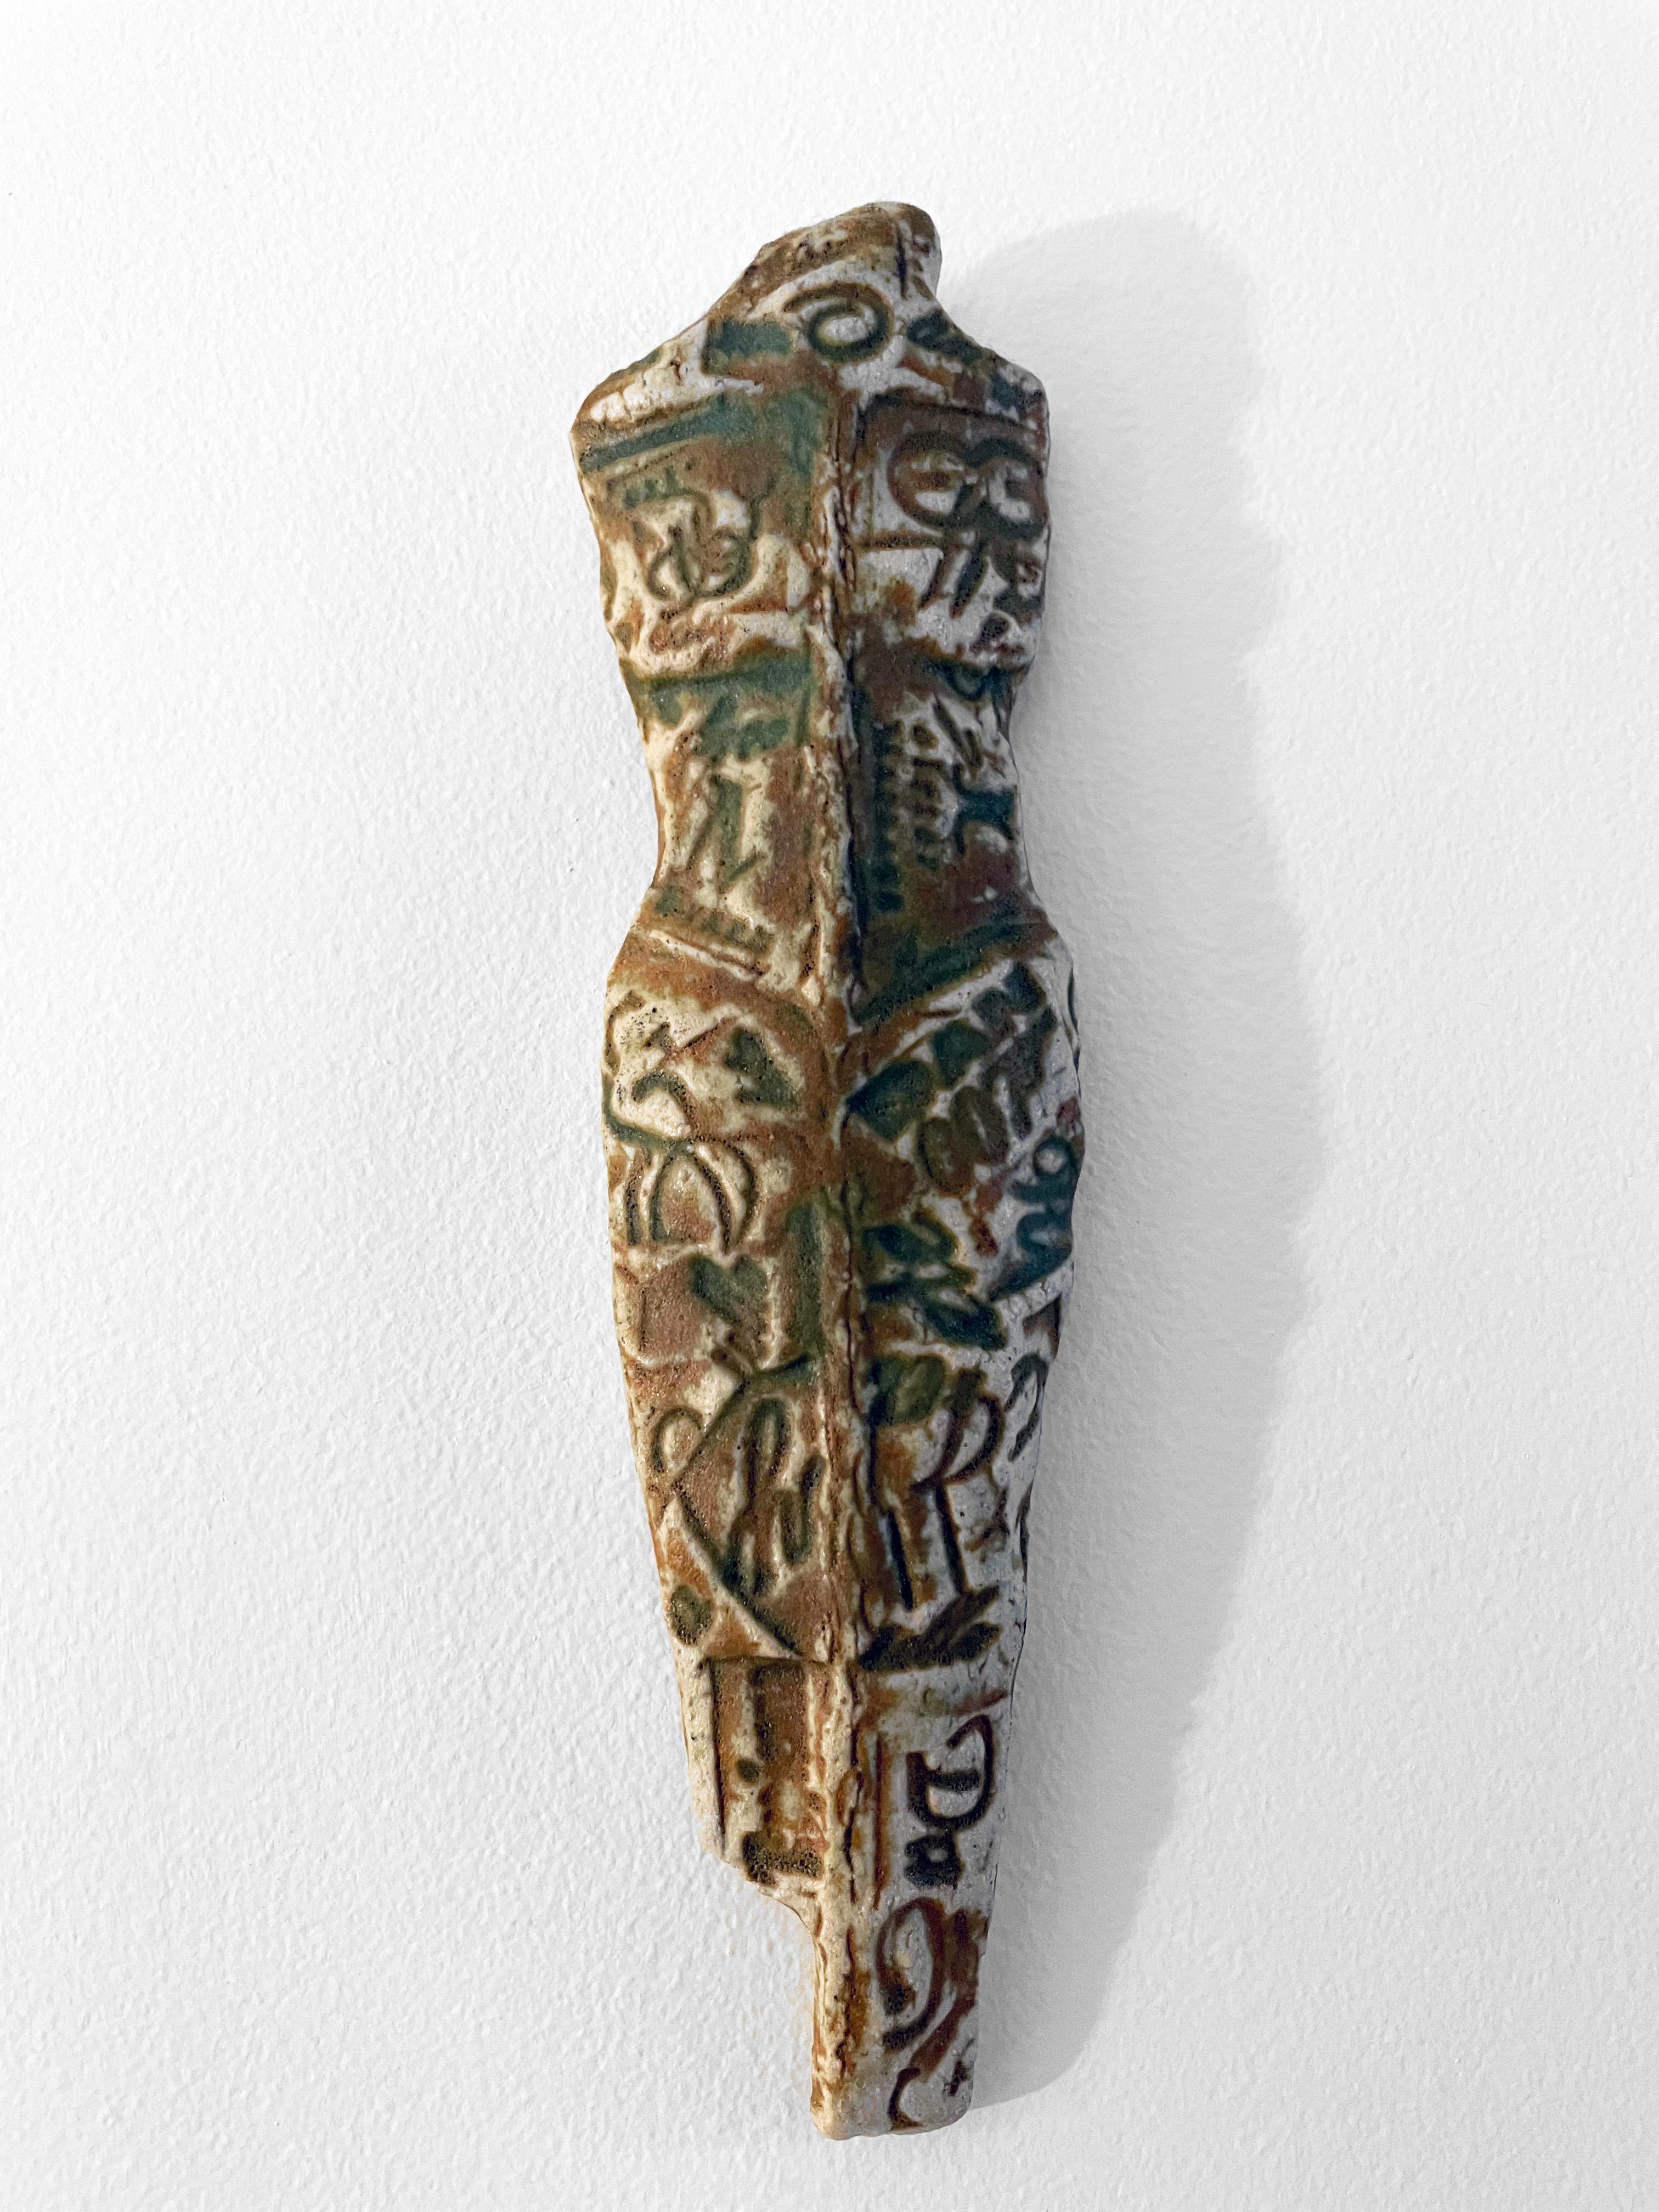 Linda Stein, Knight of Glyphs 626 - Contemporary Art Ceramic Wall Sculpture

Knight of Glyphs 626 is from Linda Stein’s Knights of Protection series, which she started after being forced to evacuate her New York downtown studio for a year post-9/11.